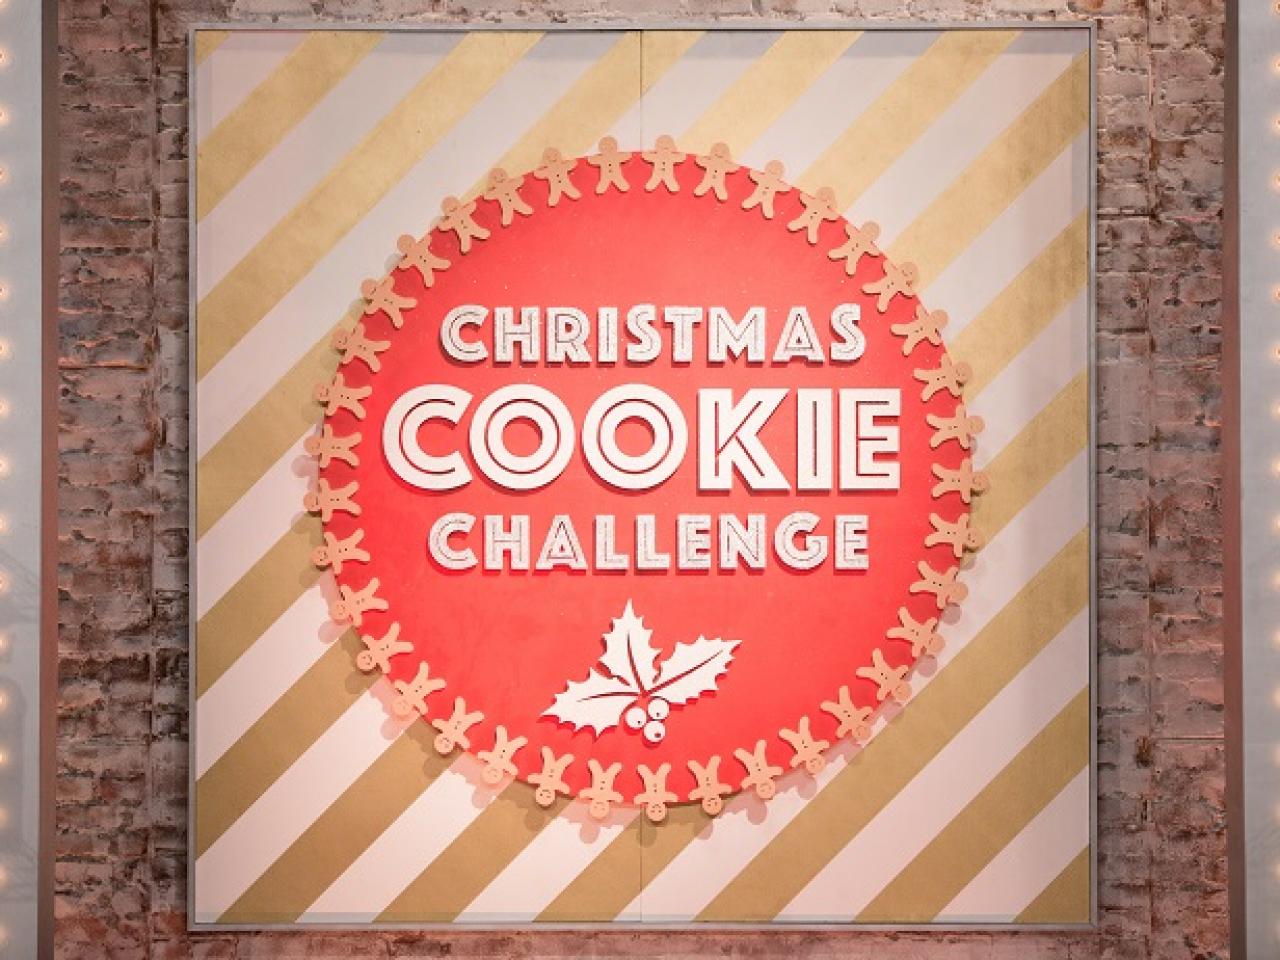 Winner of the Christmas Cookie Challenge FN Dish BehindtheScenes